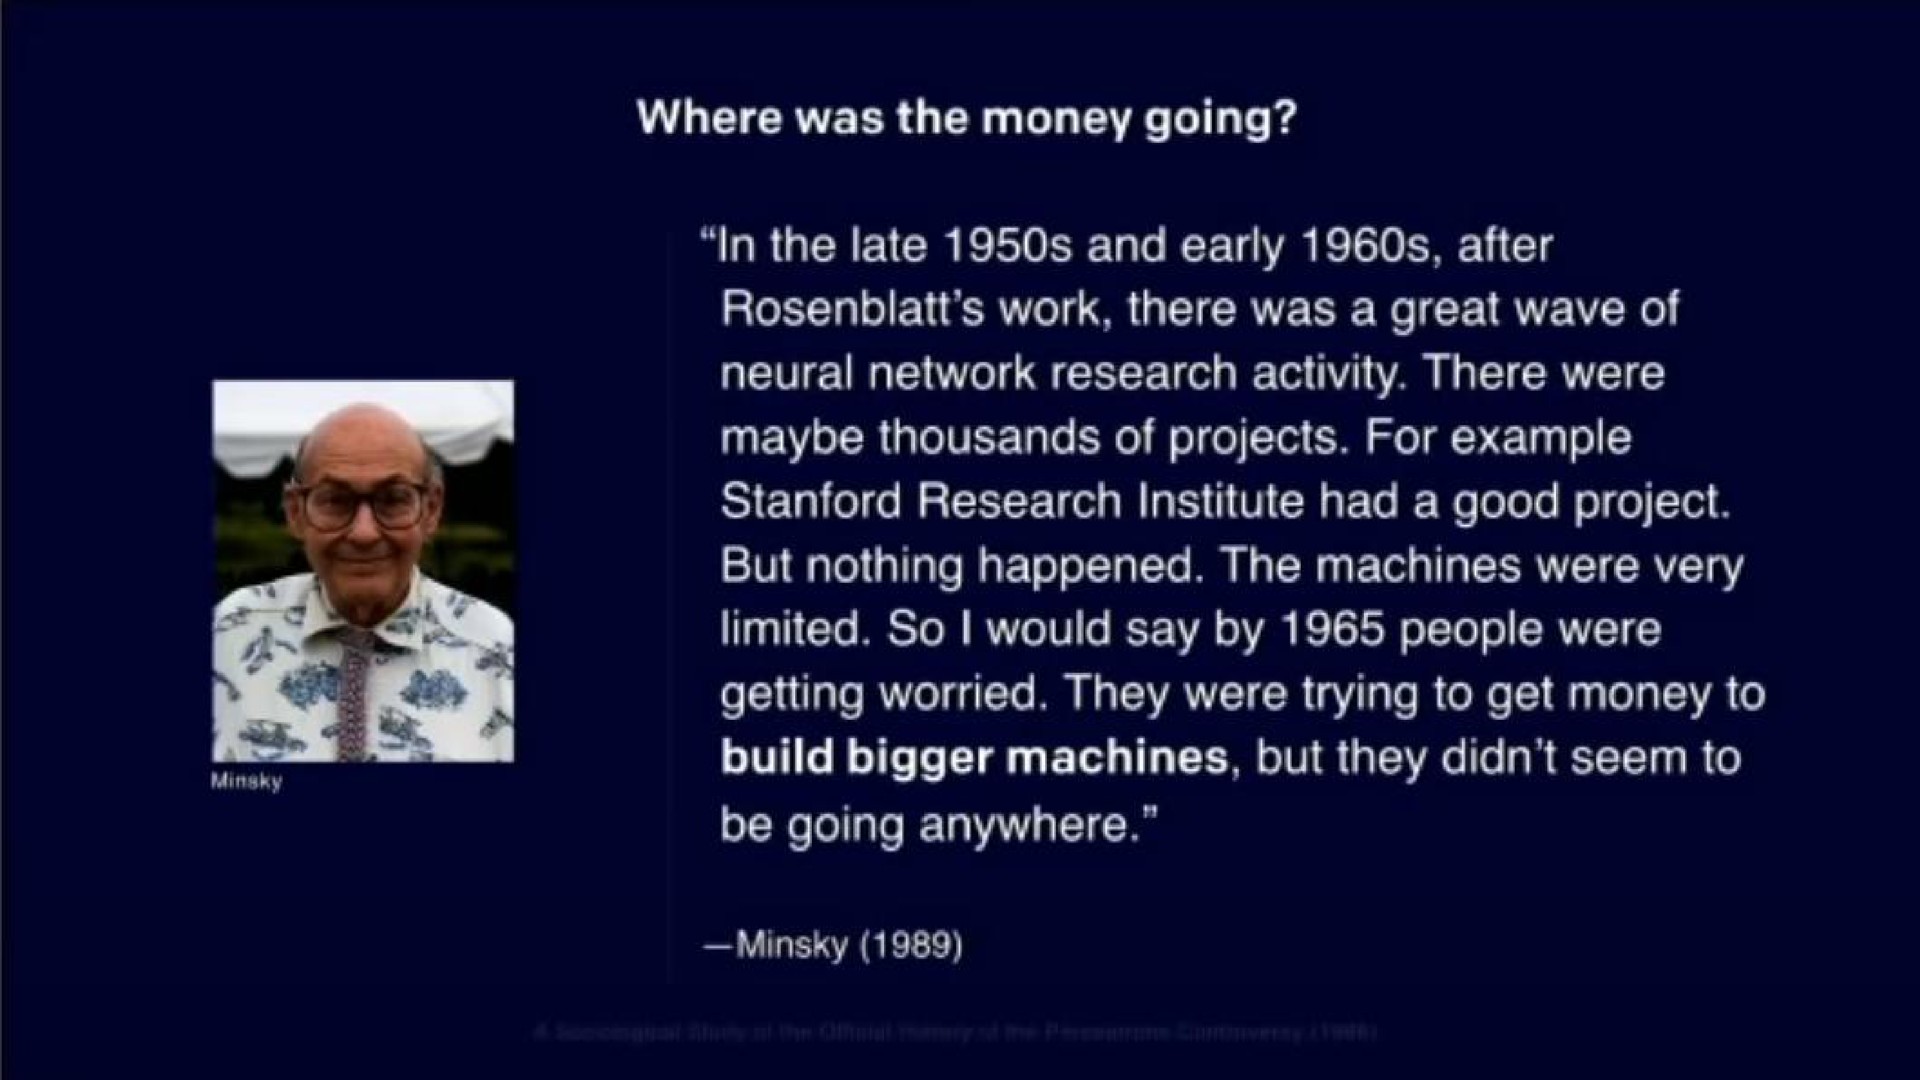 where was the money going in the late and early after work there was a great wave of neural network research activity there were maybe thousands of projects for example research institute had a good project but nothing happened the machines were very limited so would say by people were getting worried they were trying to get money to build bigger machines but they seem to be going anywhere | OpenAI